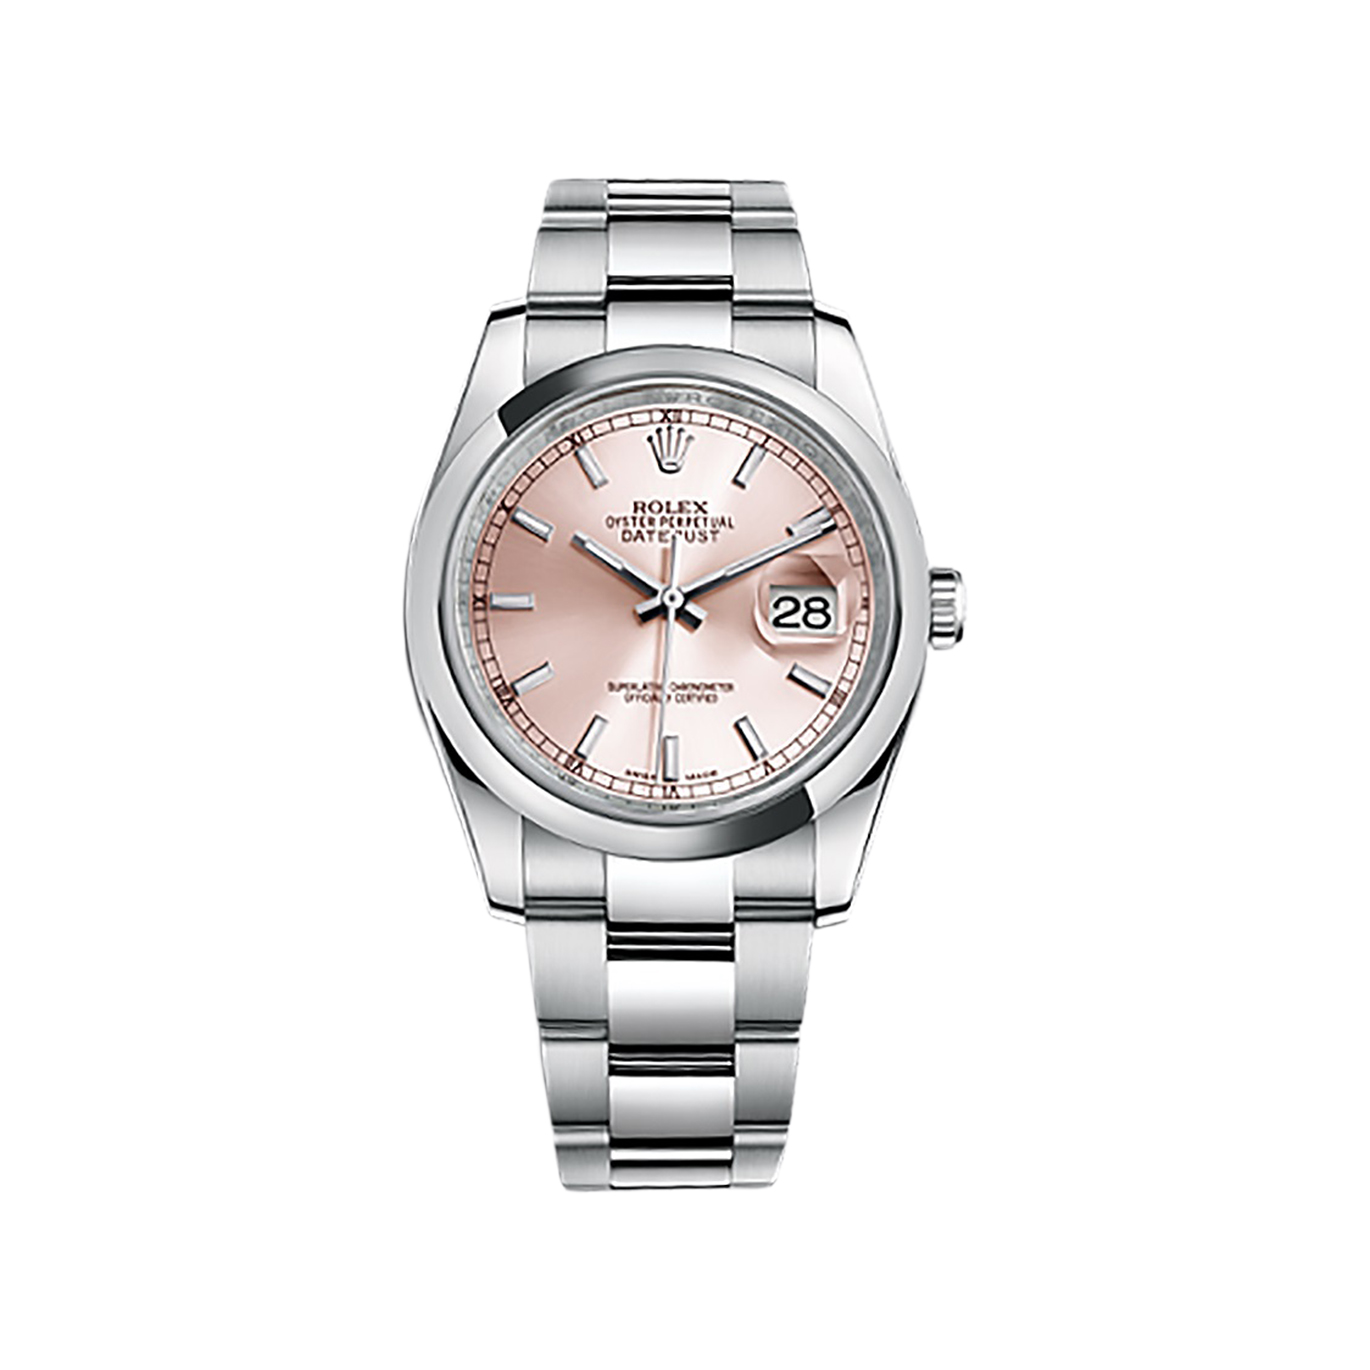 Datejust 36 116200 Stainless Steel Watch (Pink)